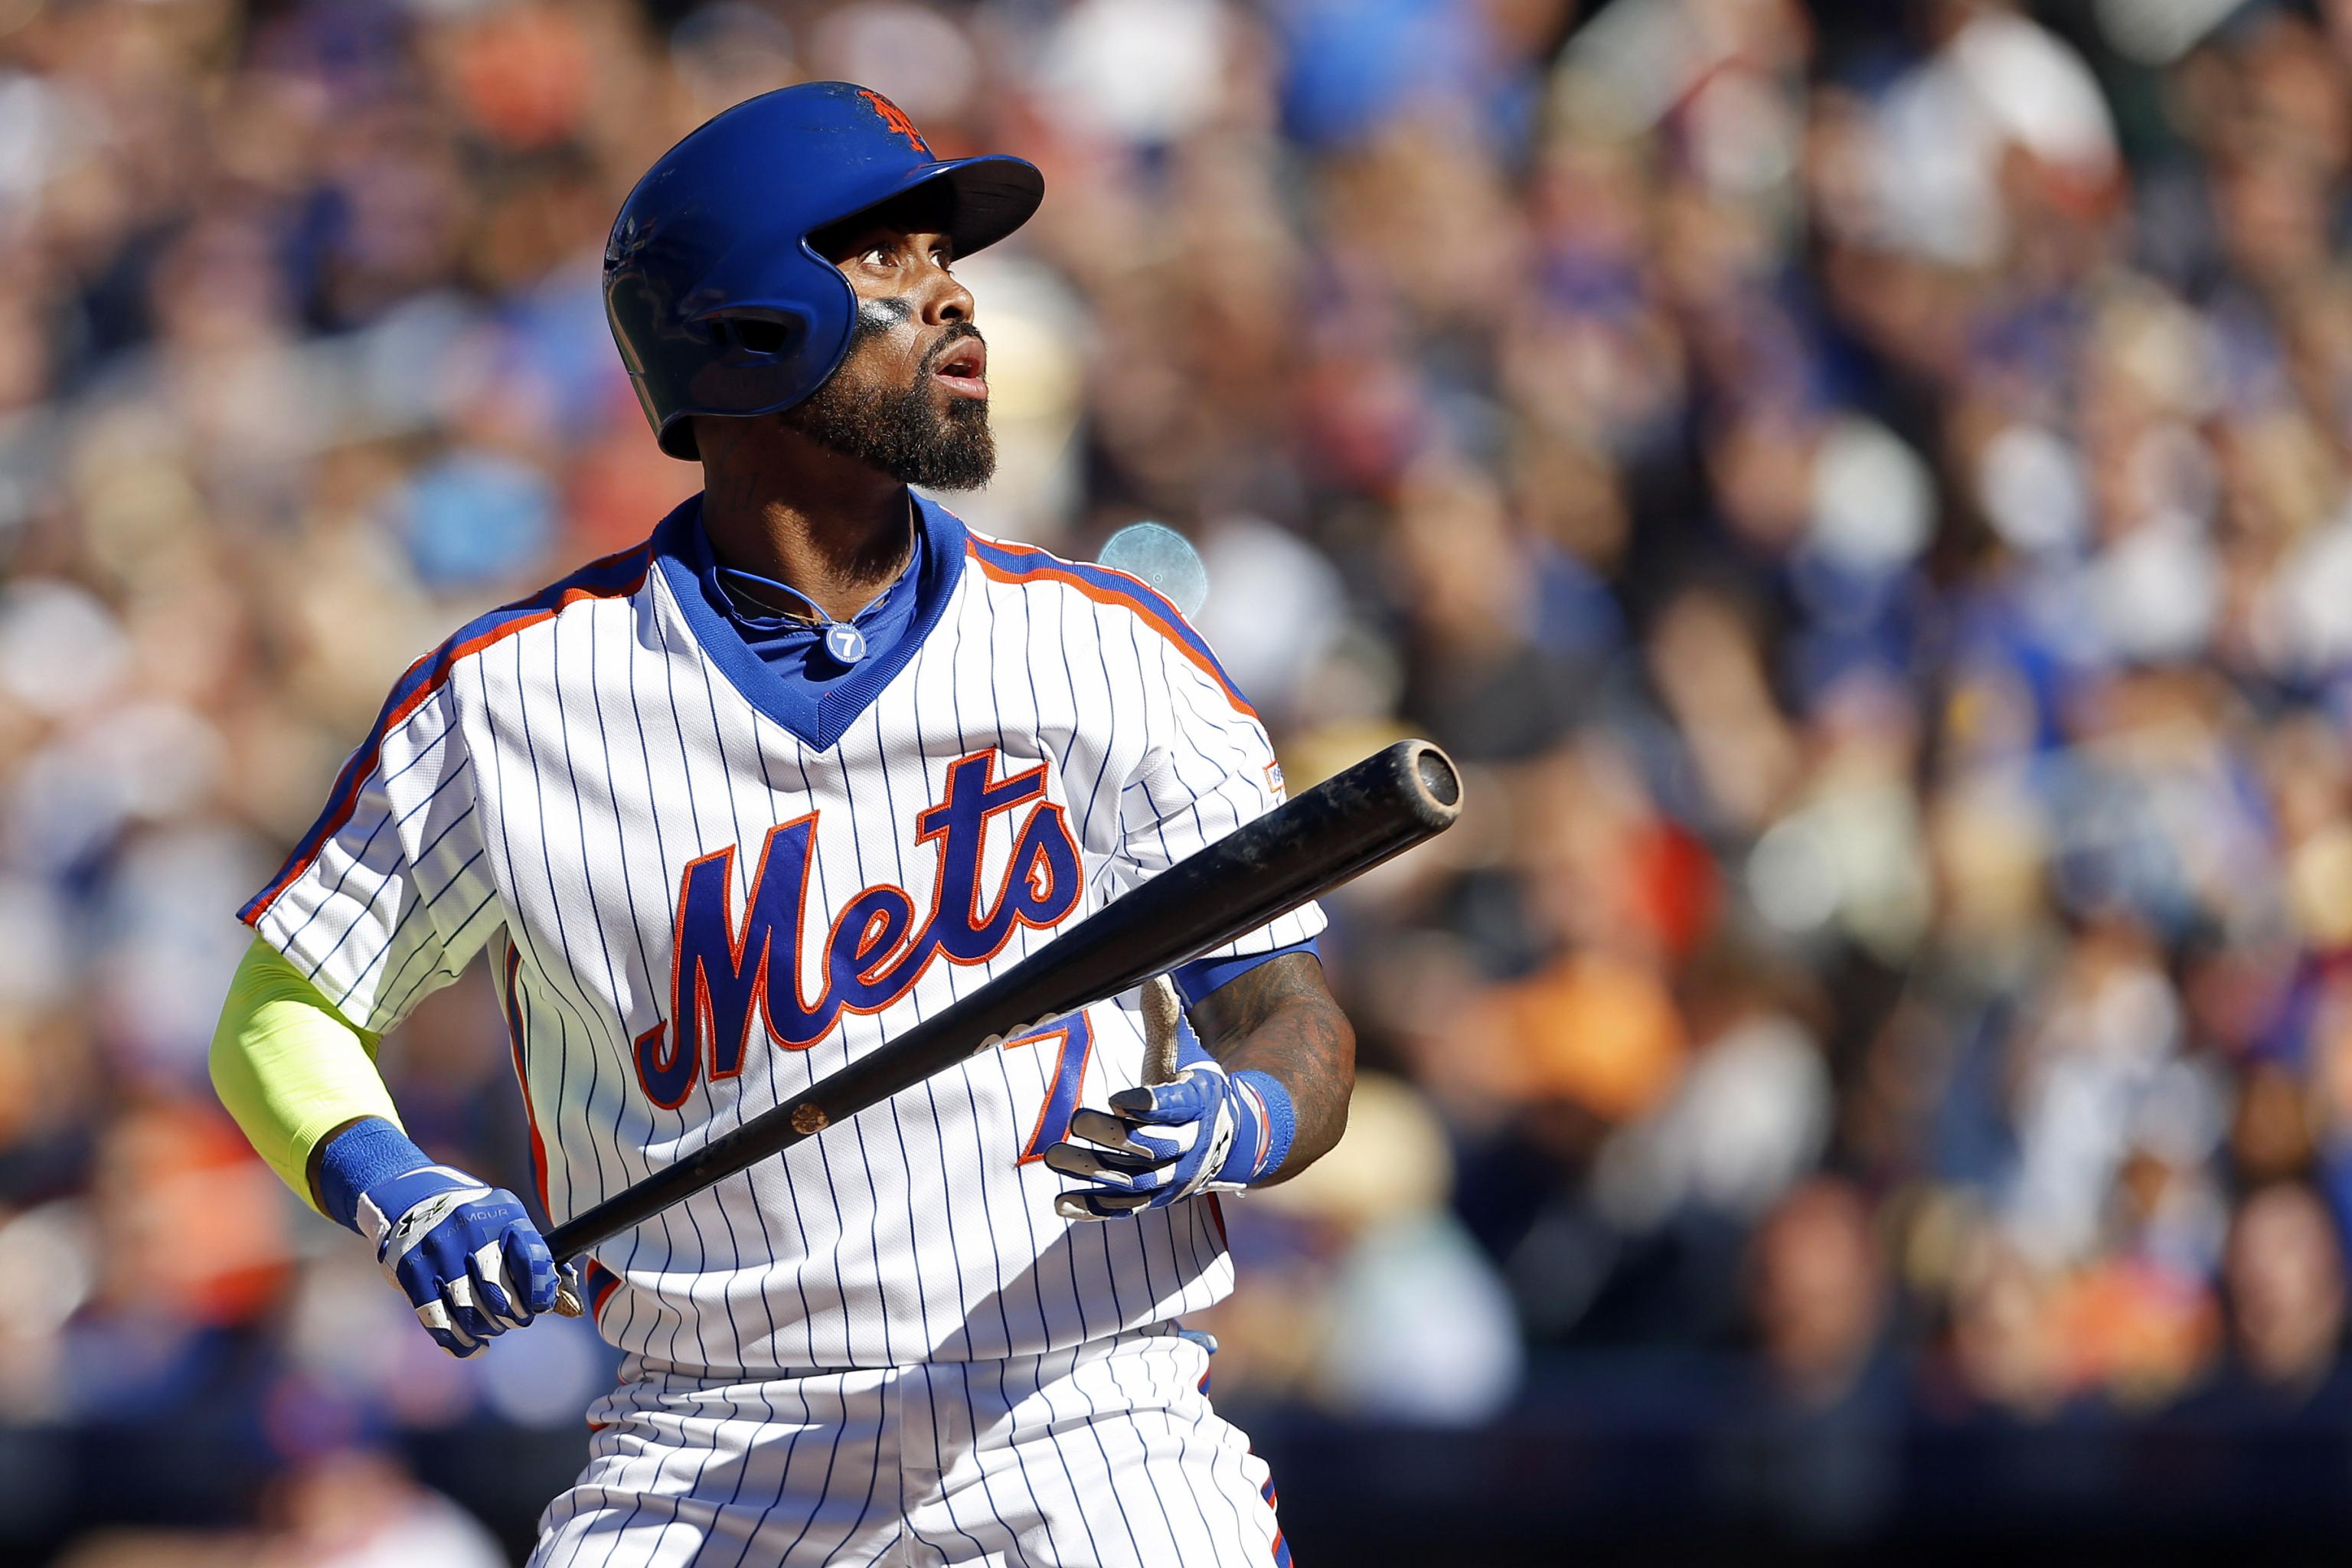 Keidel: Jose Reyes, The New York Mets And The Sad Business Of